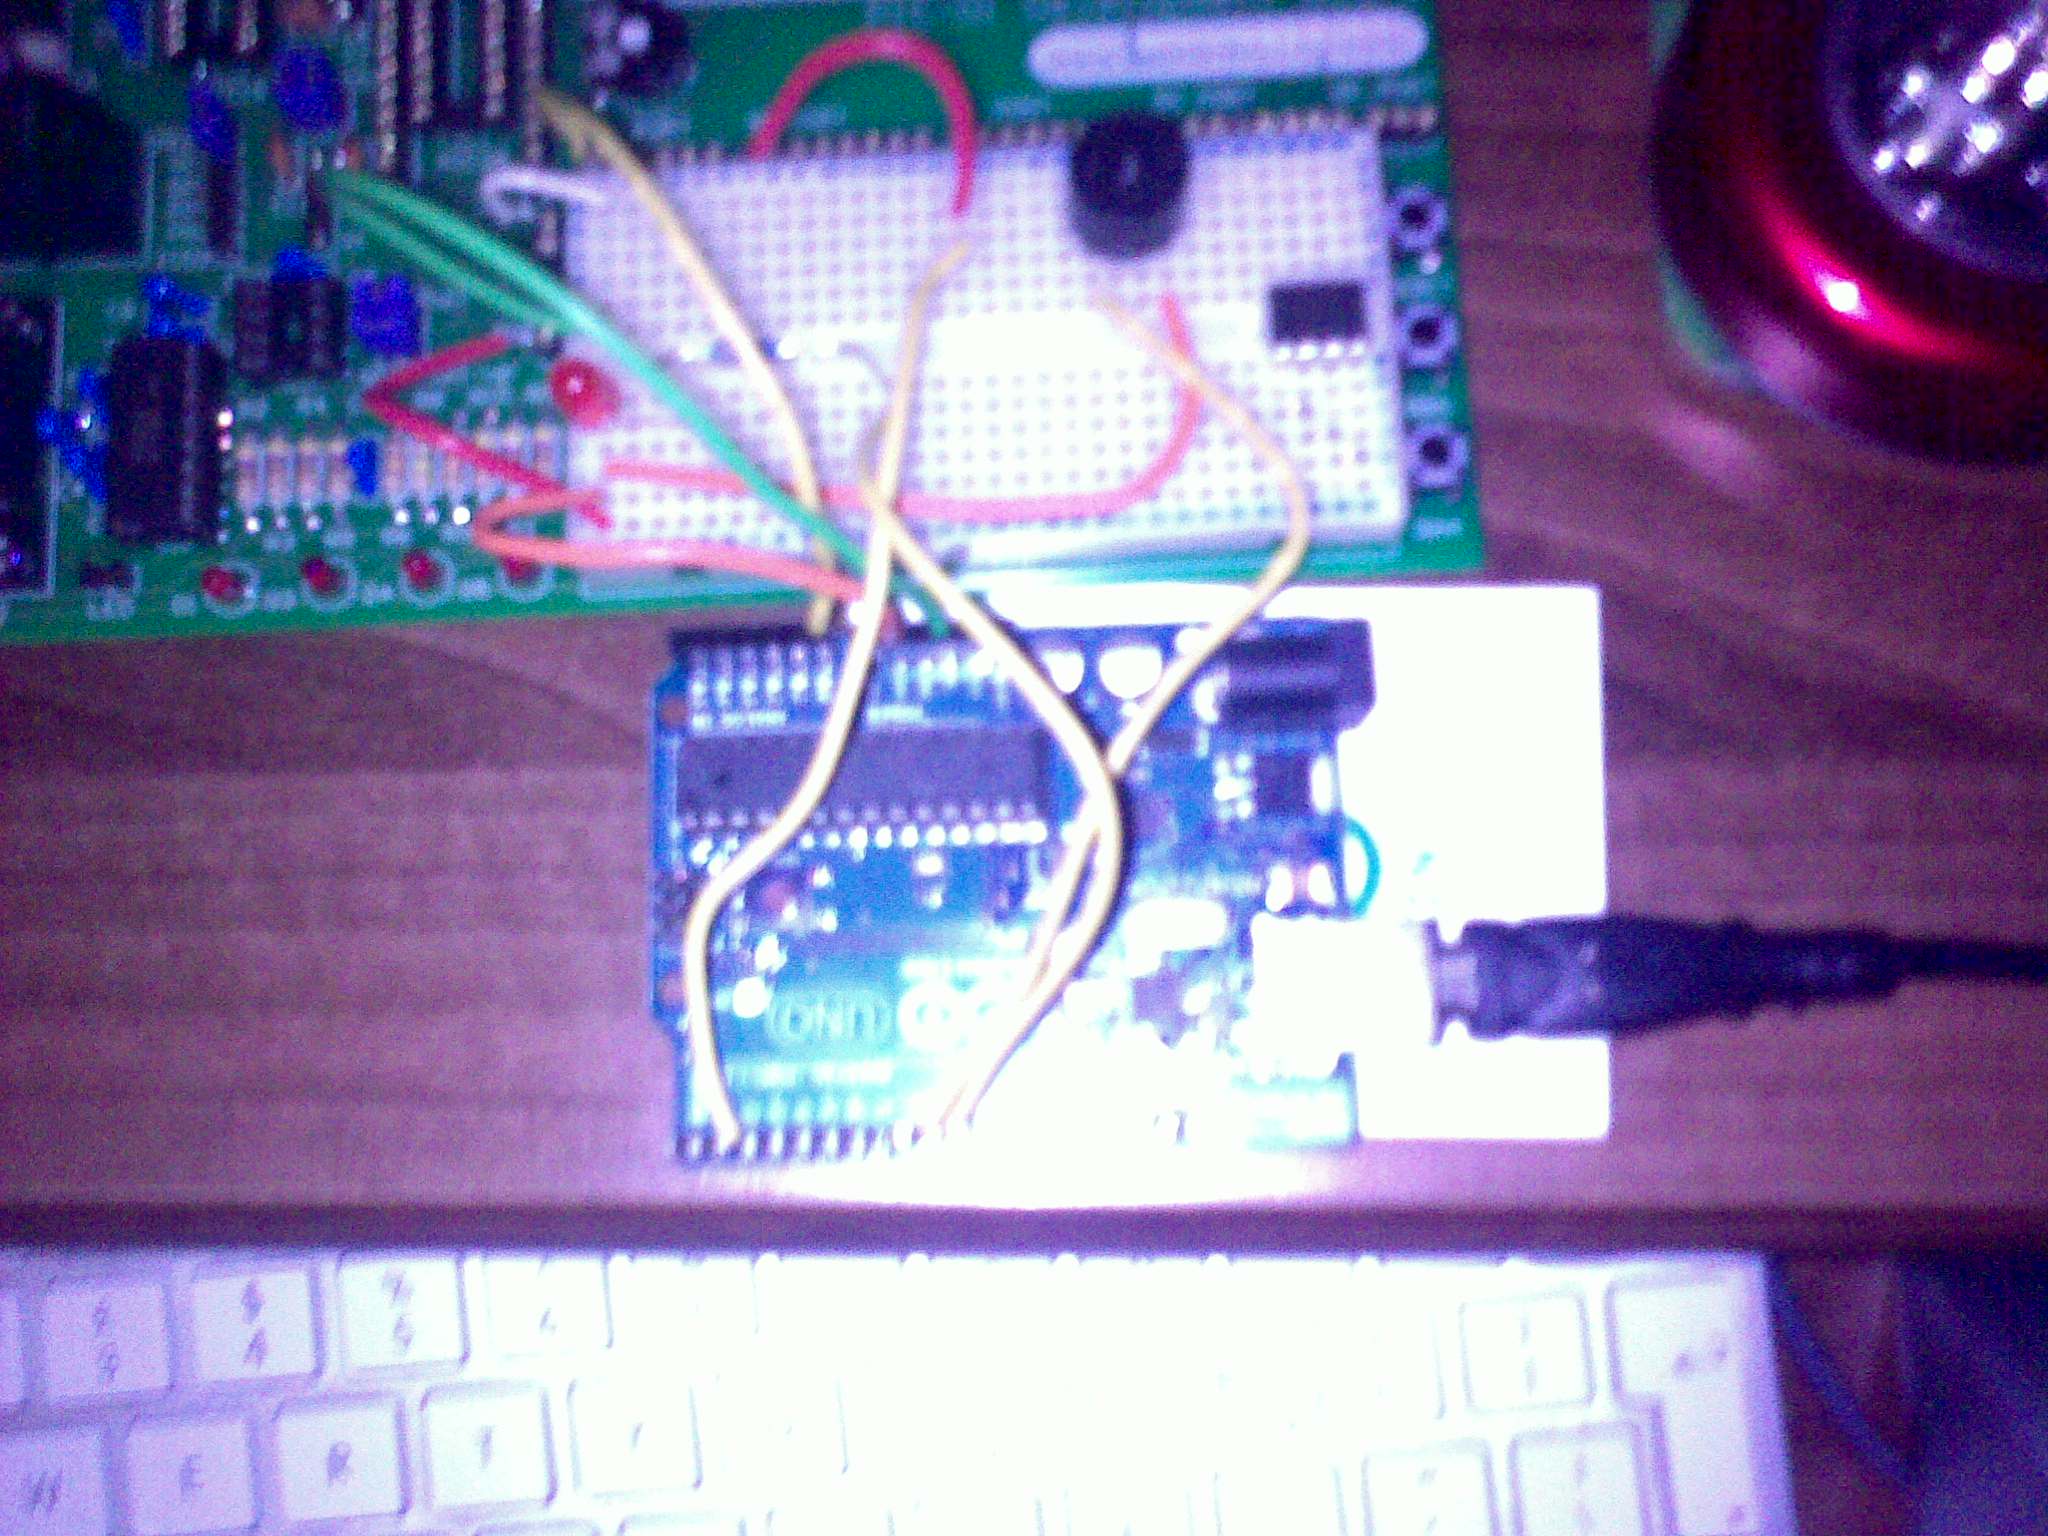 Arduino wired into LoginWay PIC-01 board